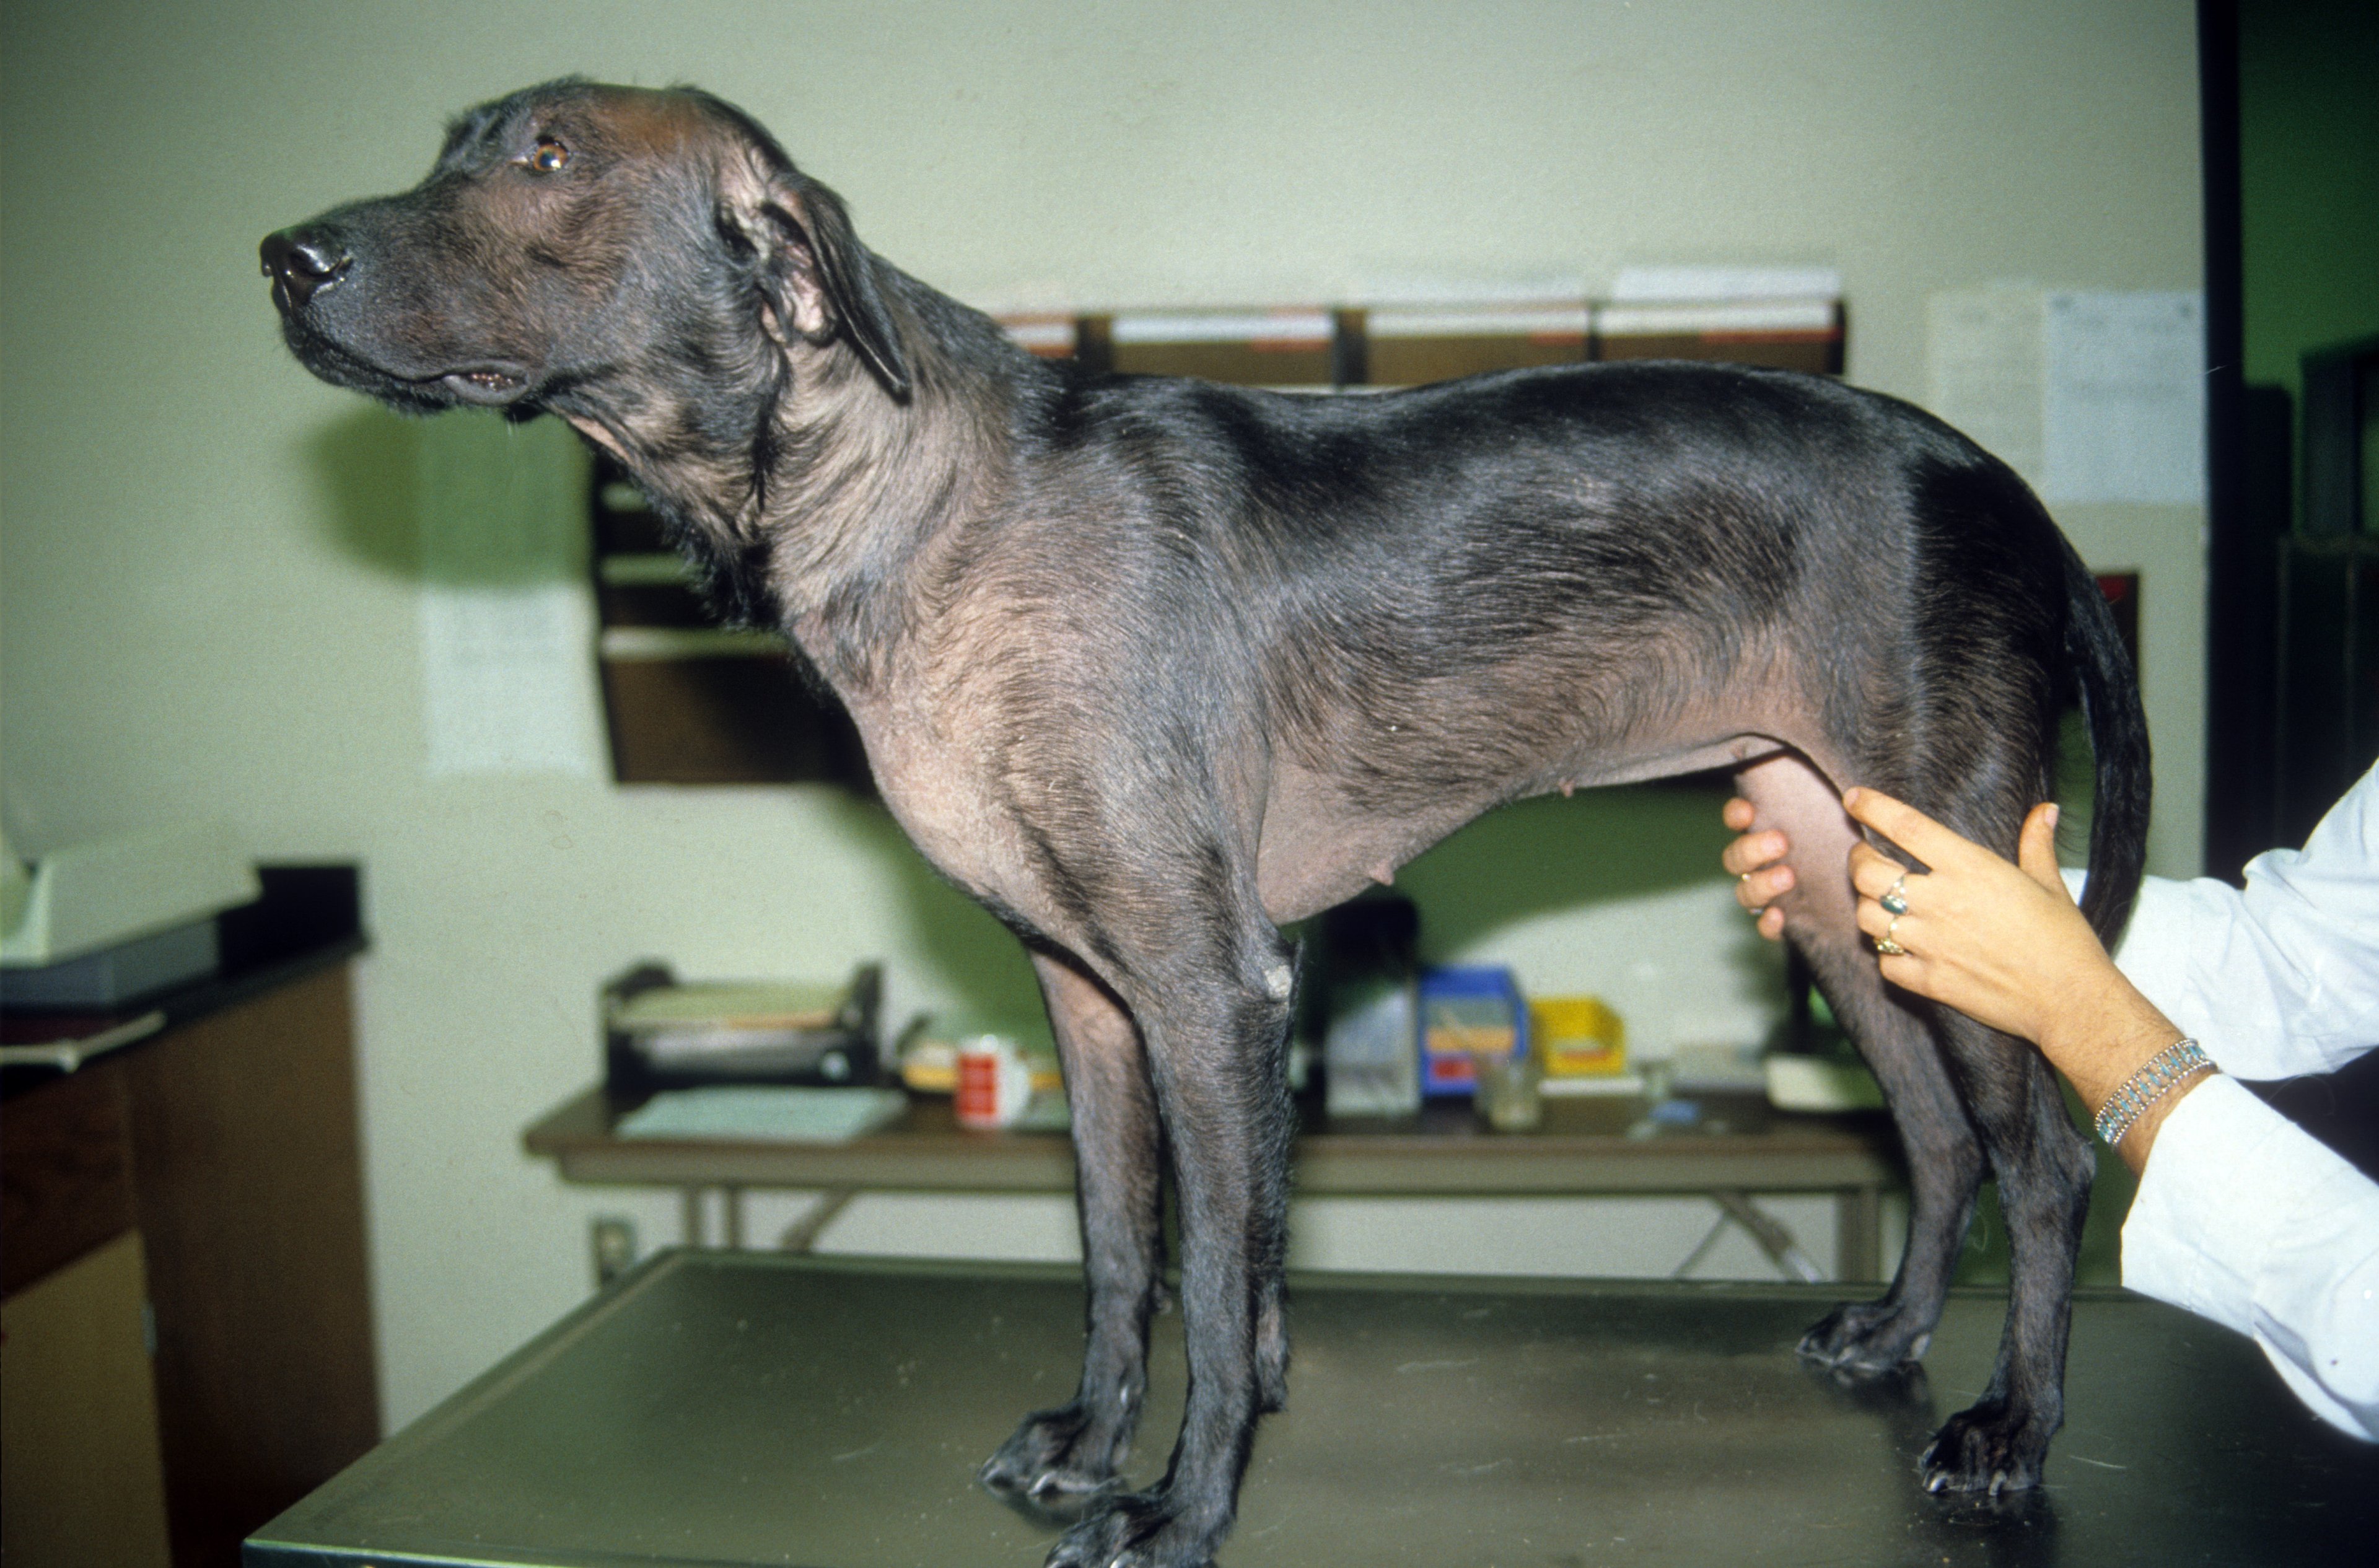 Dog in prior image as an adult with alopecia